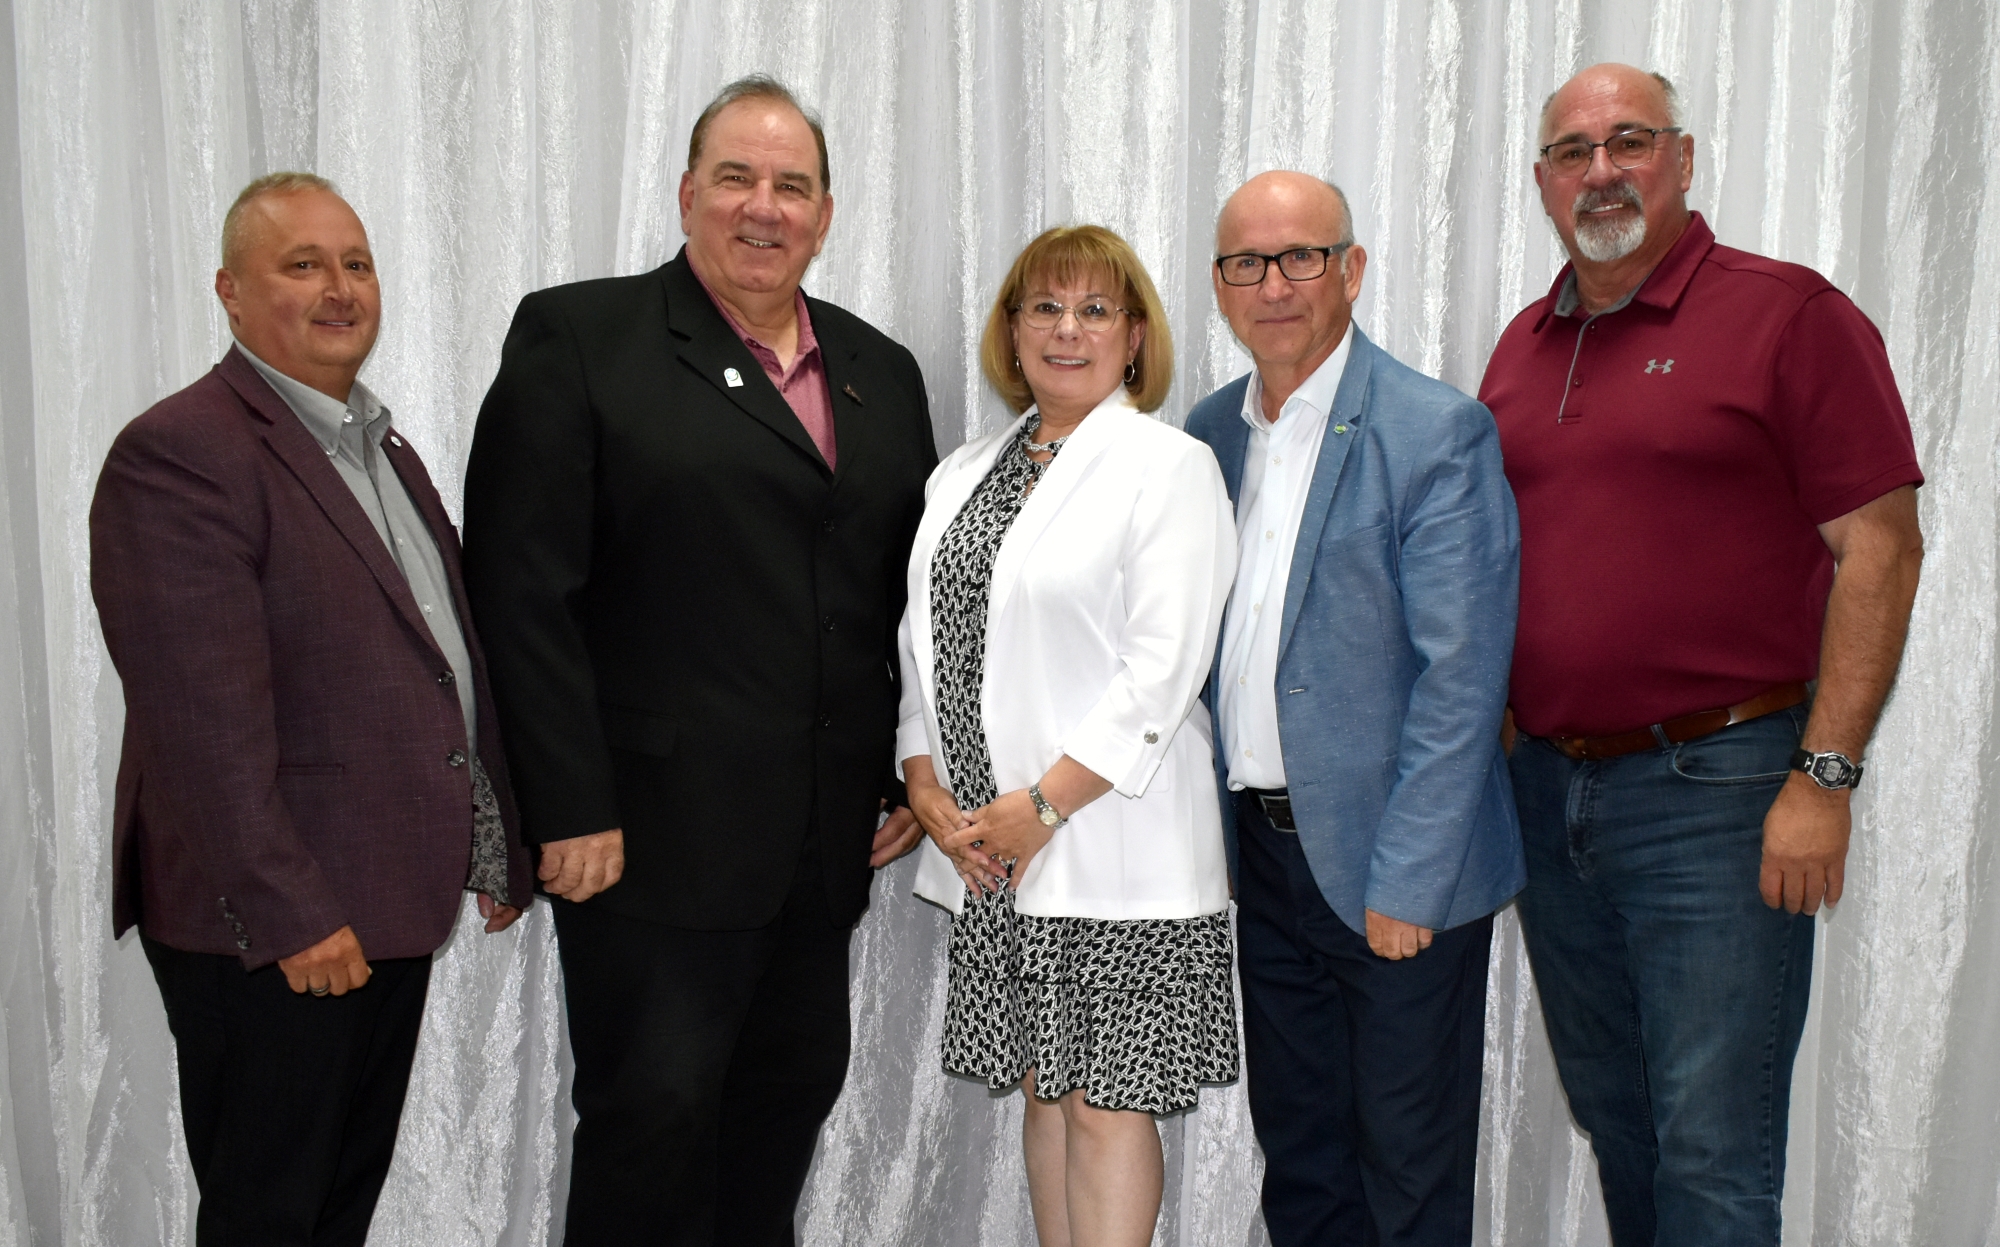 In the usual order. Mario Pelletier (mayor of Village Bois-Joli) 2nd vice-president, Brad Mann (president of the Restigouche Rural District advisory council) president / Chairman, Betty Ann Fortin, Chief Executive Officer and corporate secretary, Jean-Guy Levesque (mayor, Campbellton Regional Community) 1st vice-president and Normand Pelletier (mayor of the town Heron Bay), president of the finance committee